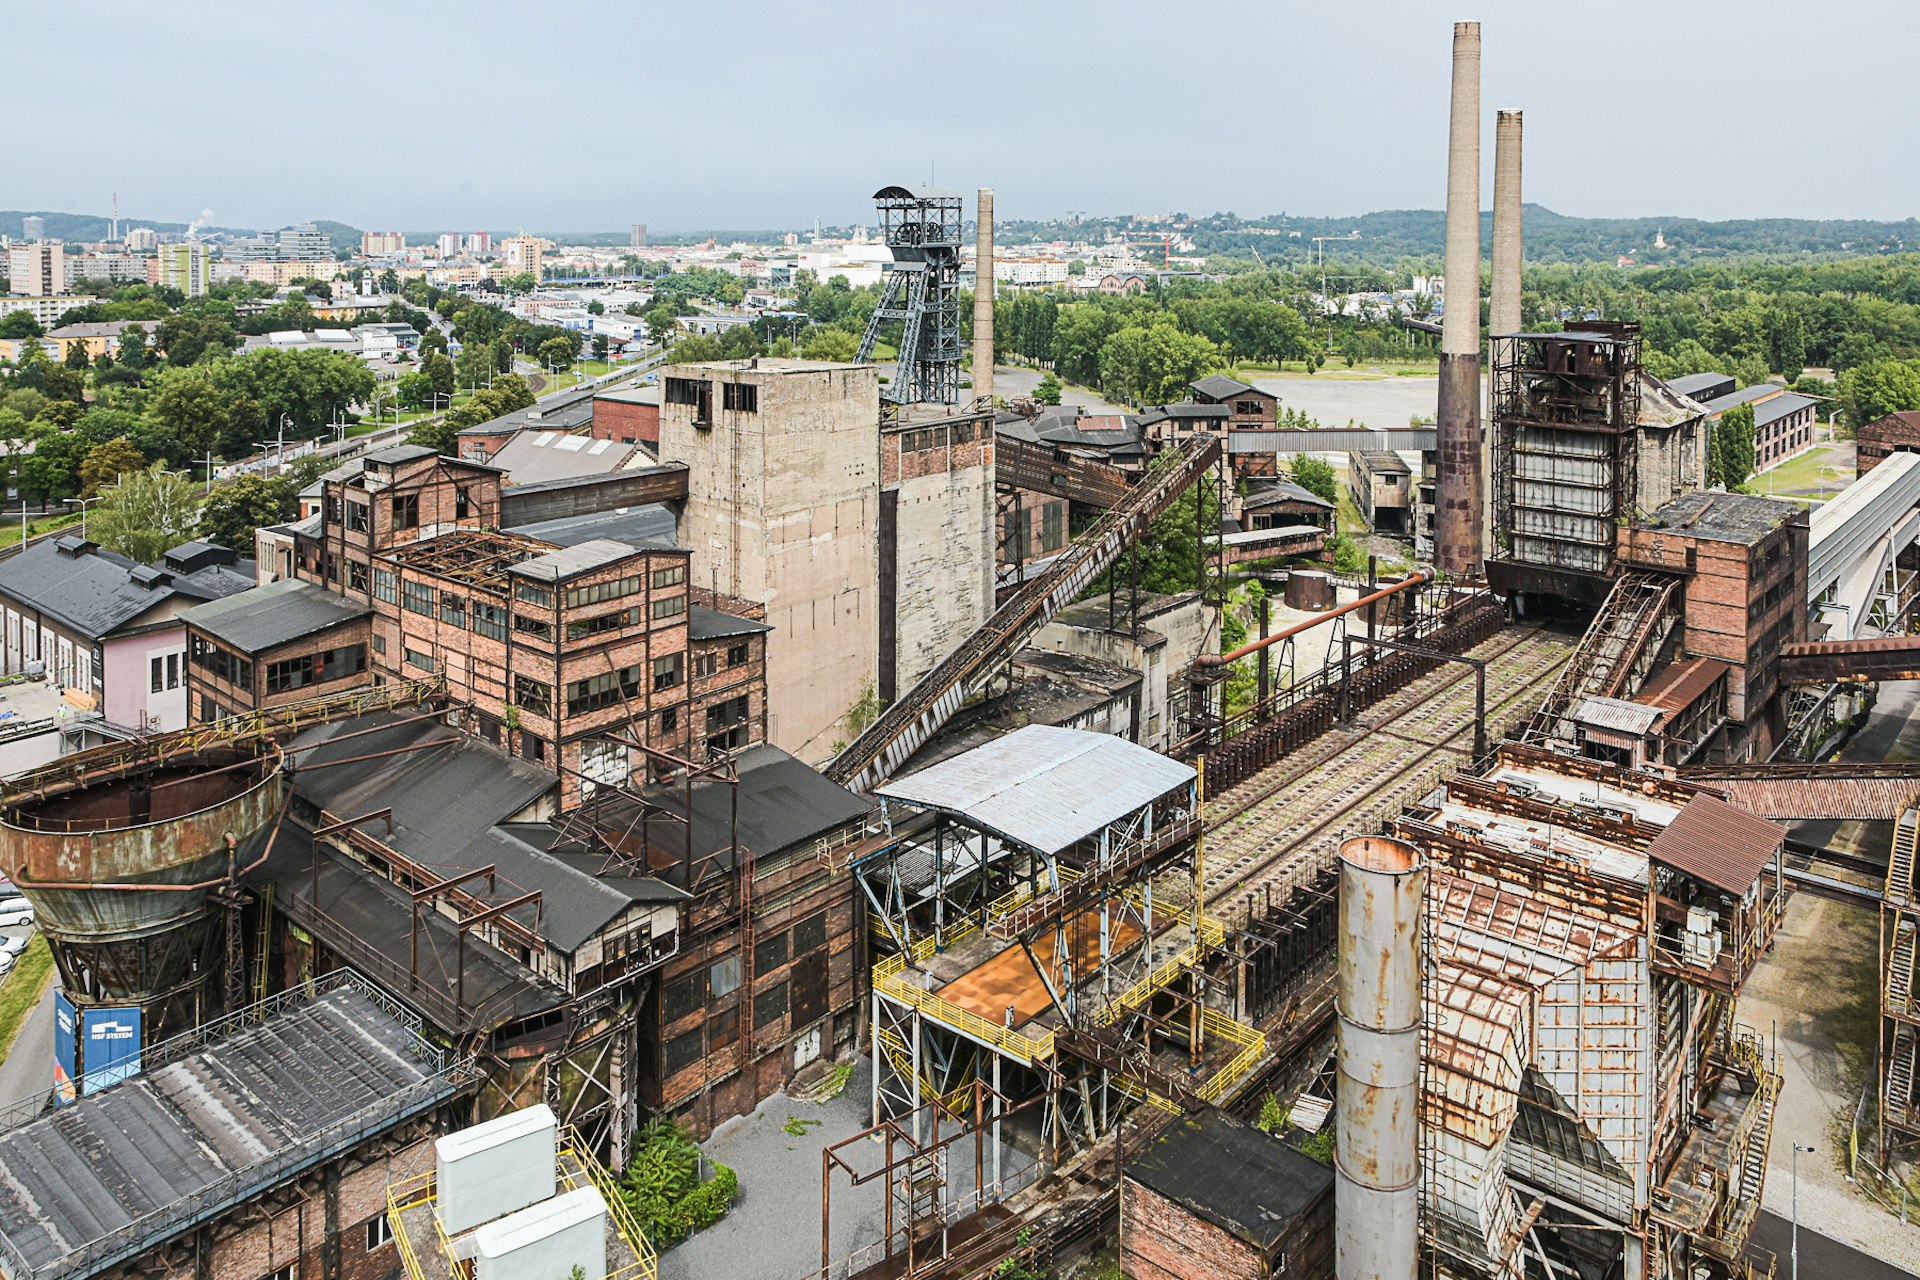 The view over Dolní Vítkovice from the elevated platform of the Bolt Tower, the former blast furnace. The city of Ostrava is visible in the background.